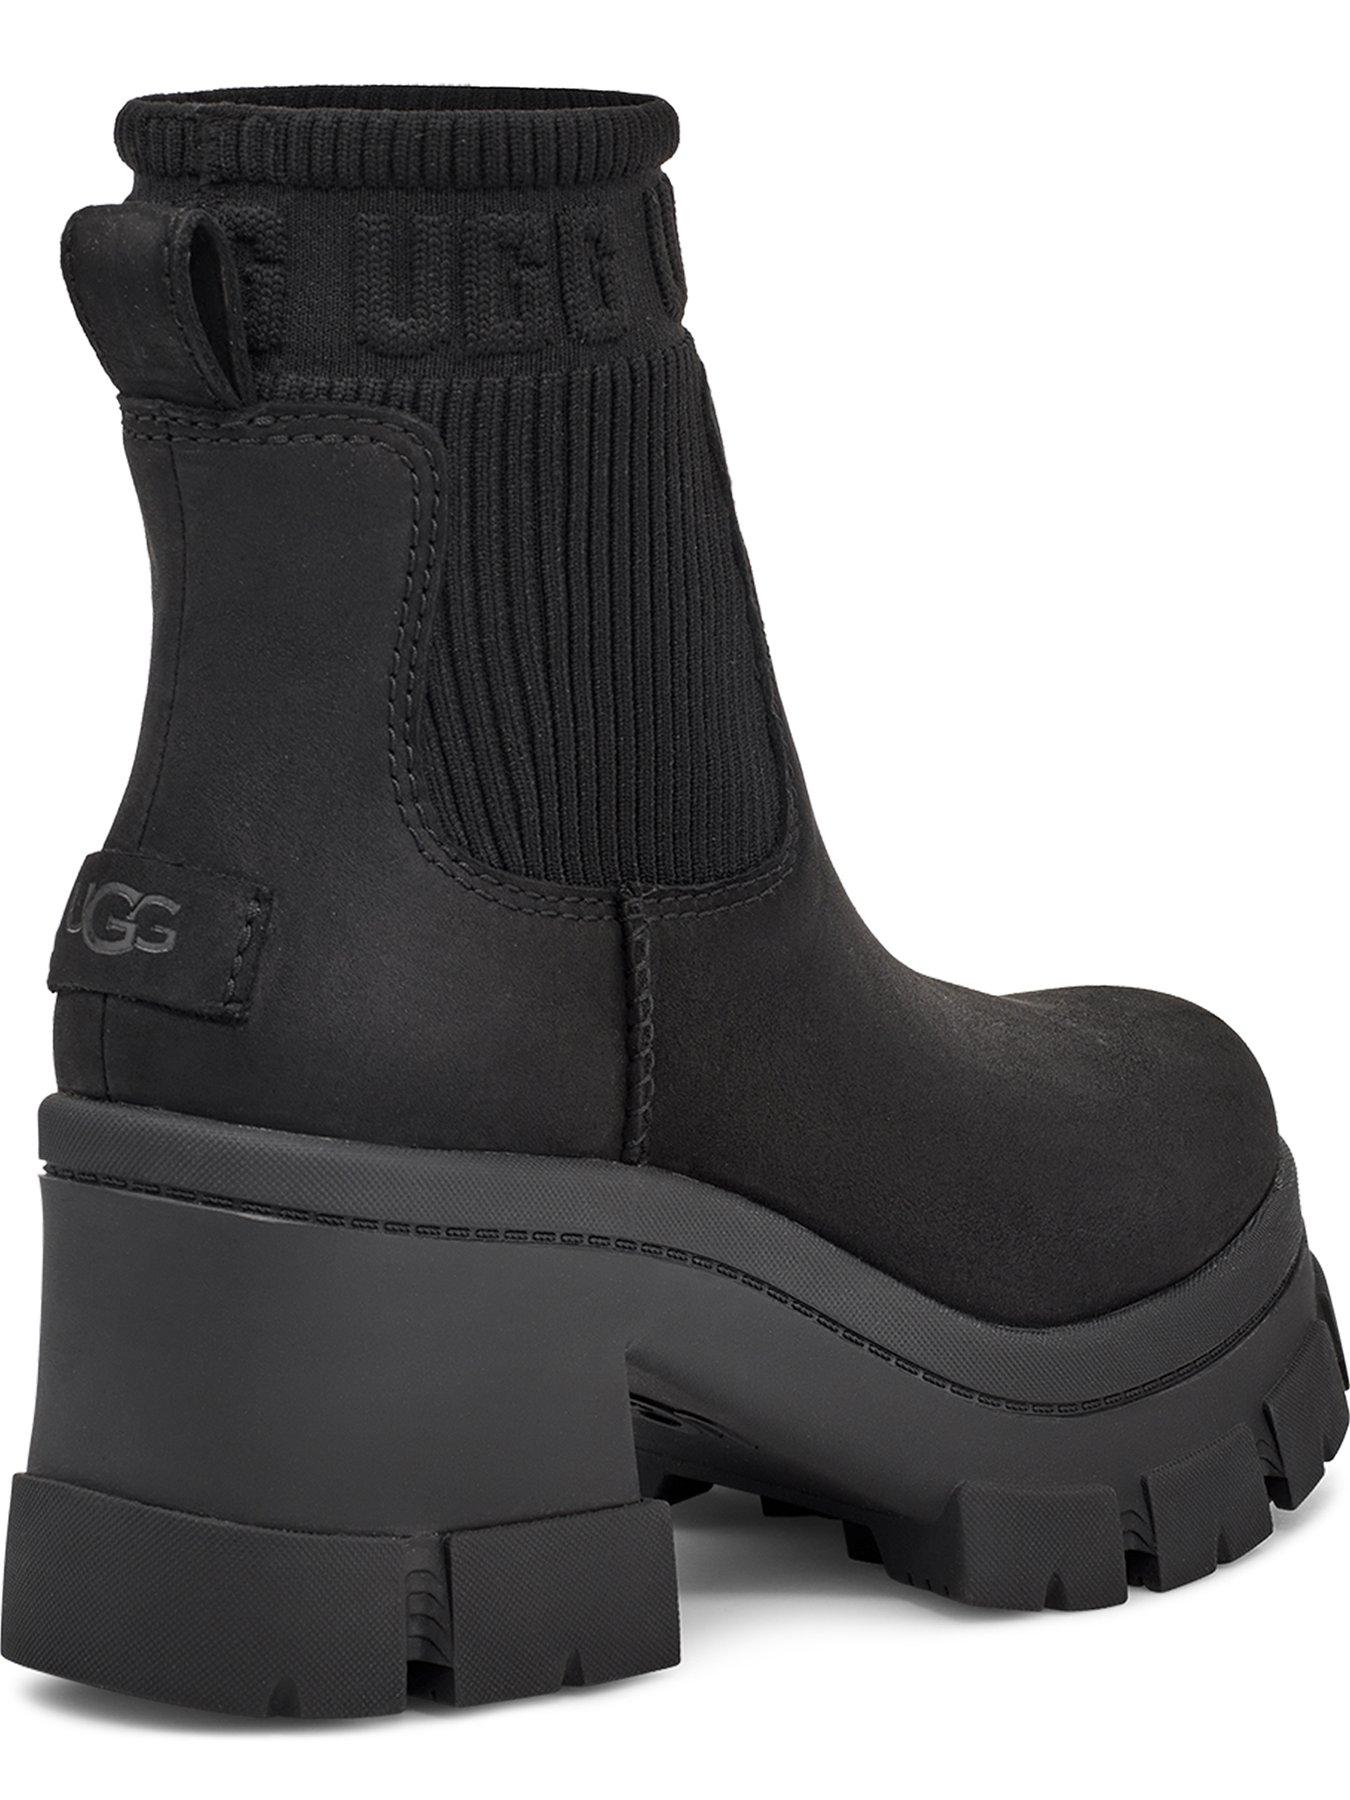 UGG Brooklyn Chelsea Ankle Boots - Black | very.co.uk